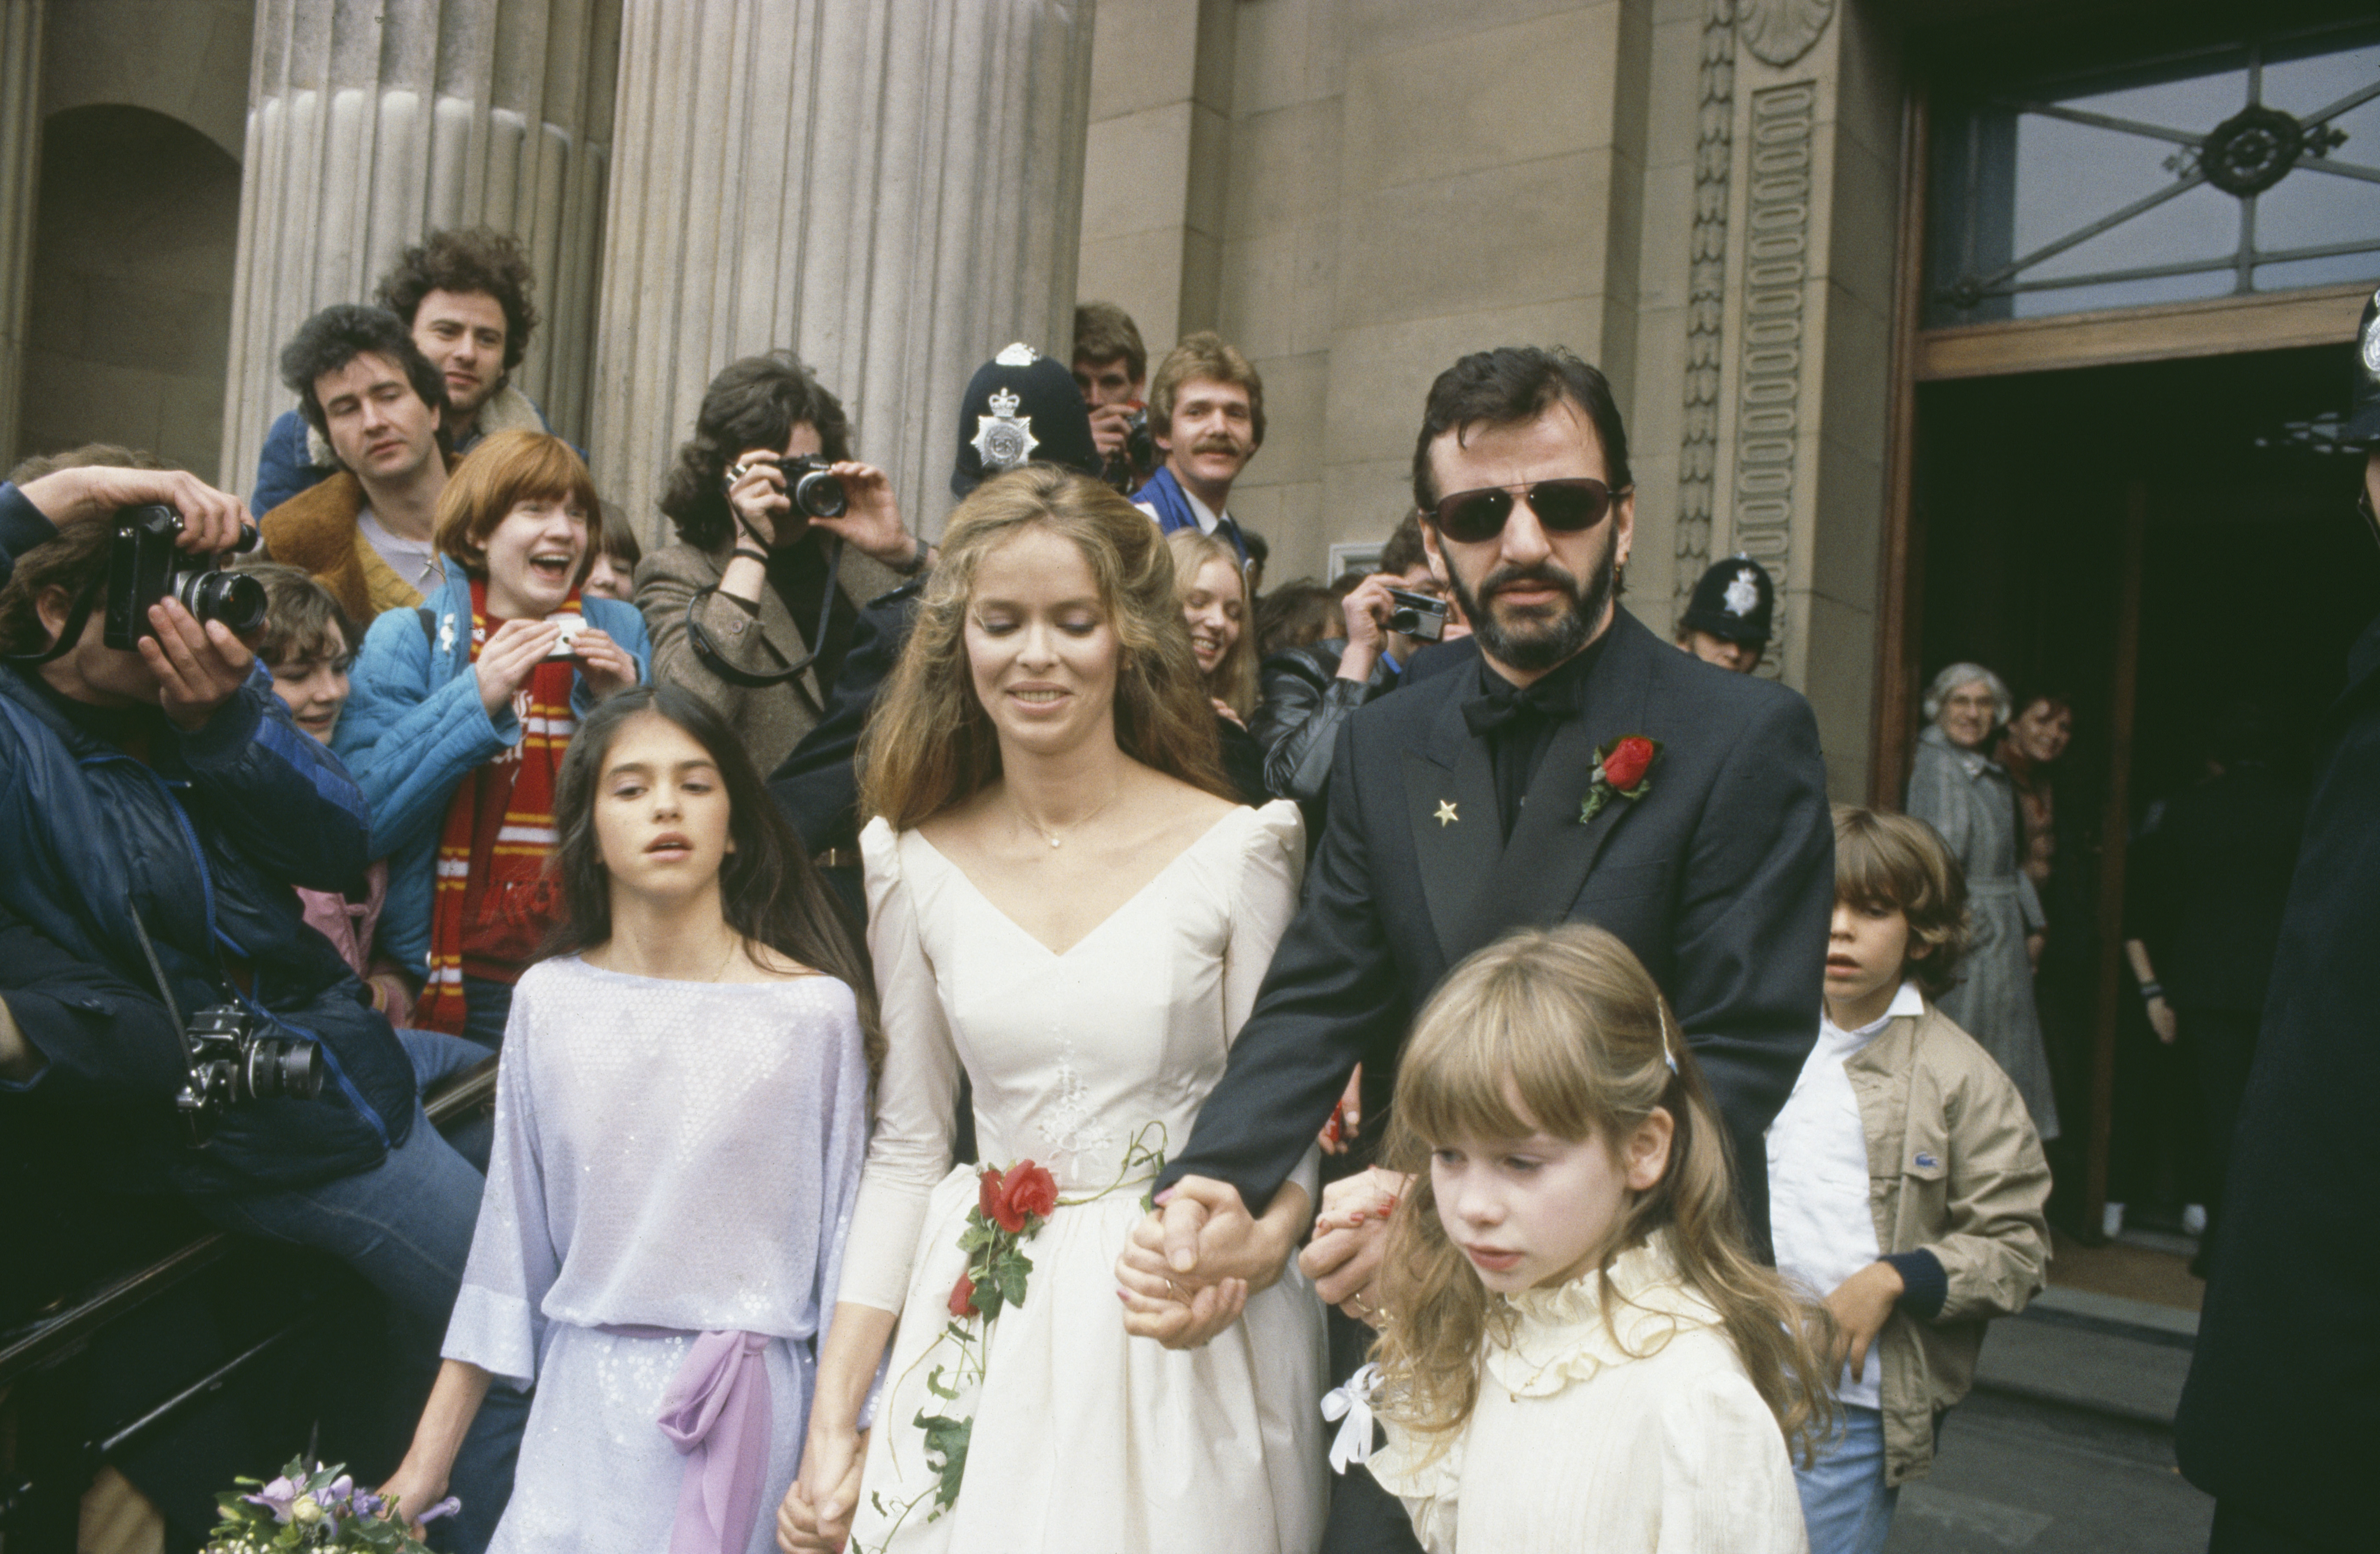 Barbara Bach and Ringo Starr leaving Marylebone Register Office after their wedding, in London, on April 27, 1981. | Source: Getty Images